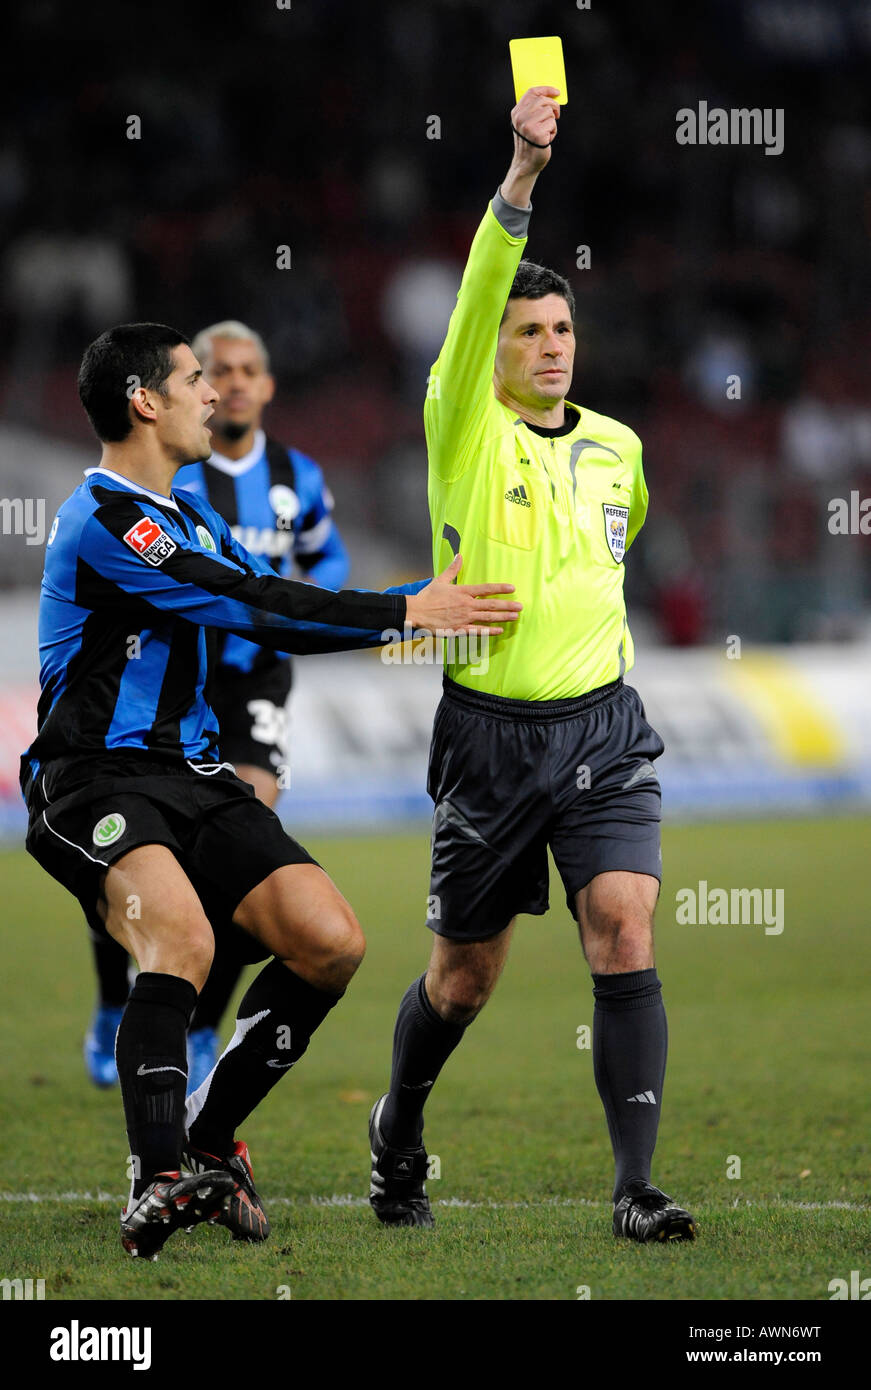 Referee Dr. Markus MERK showing yellow card while Ricardo COSTA VfL Wolfsburg is objecting Stock Photo